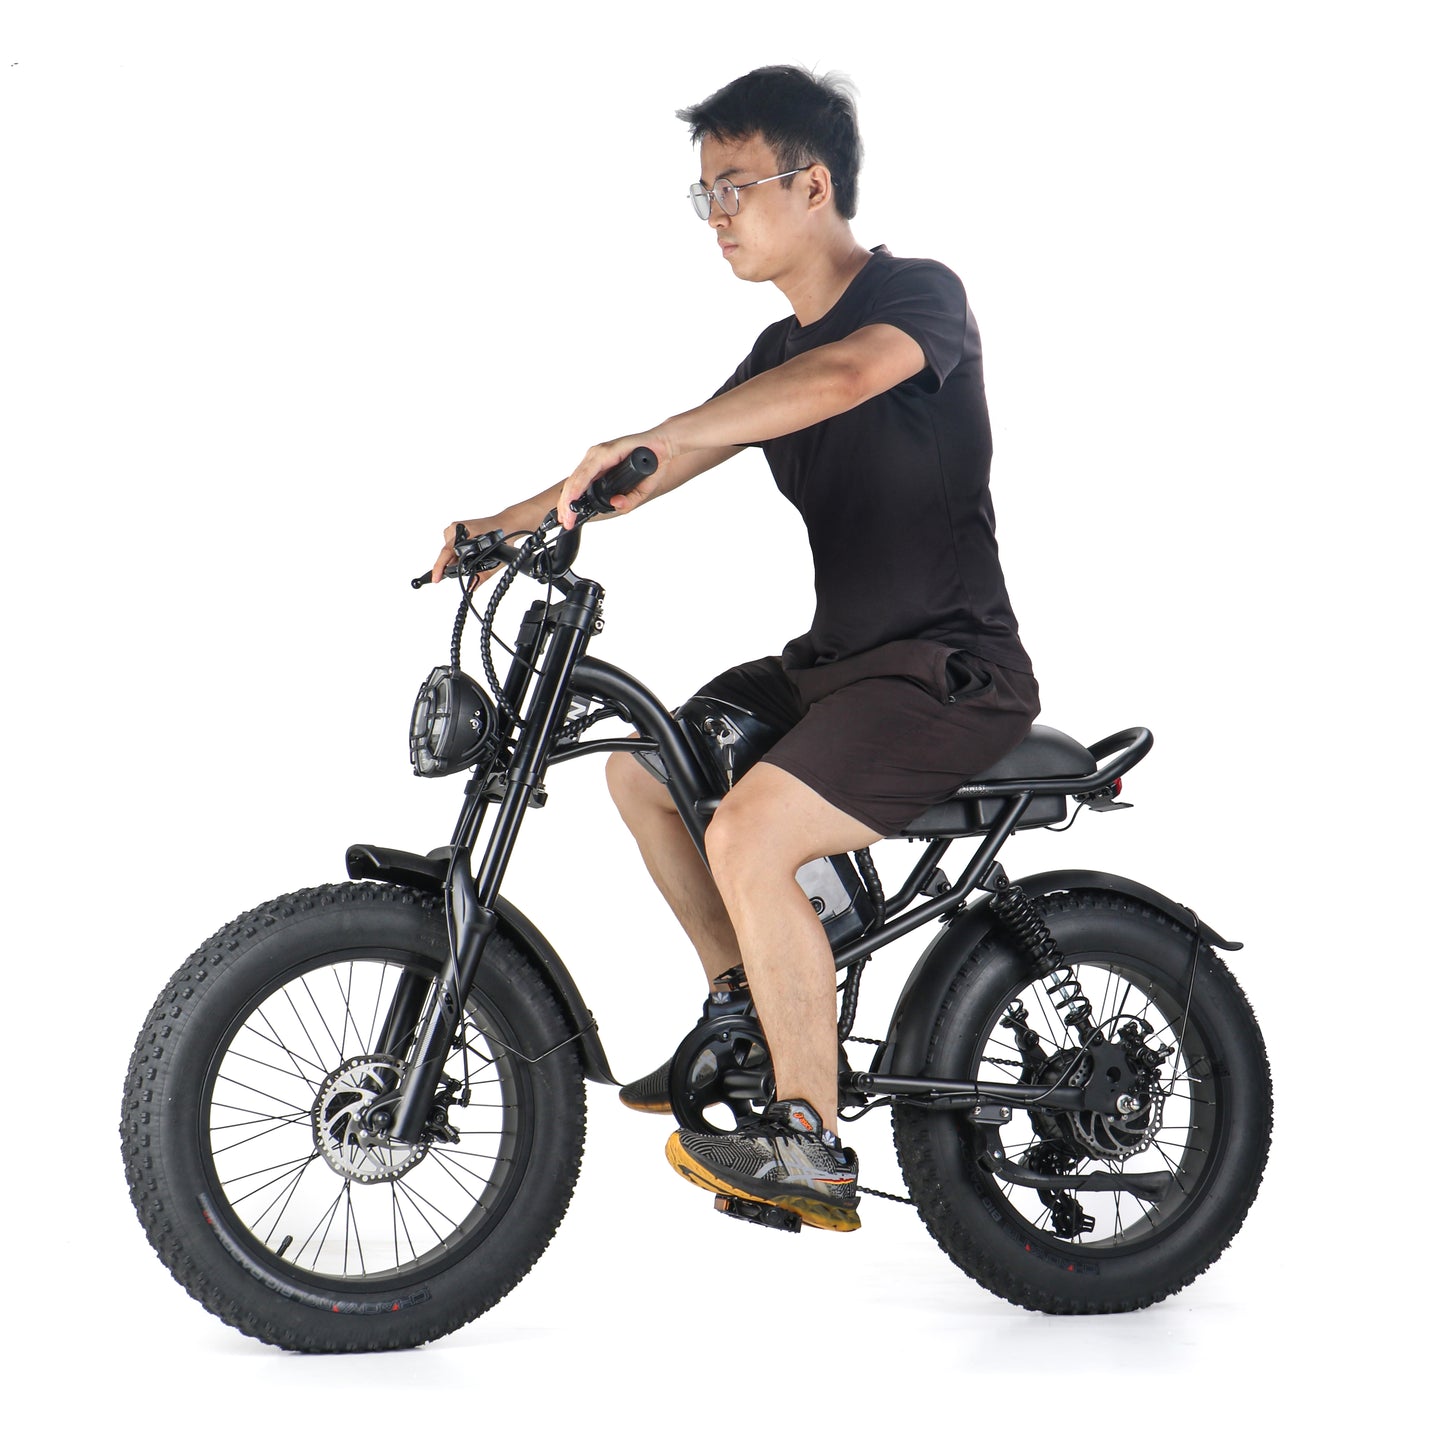 US Warehouse Stock GYL108 20 Inch Wheel Aluminum Alloy Electric Bike with 48V 15AH Battery